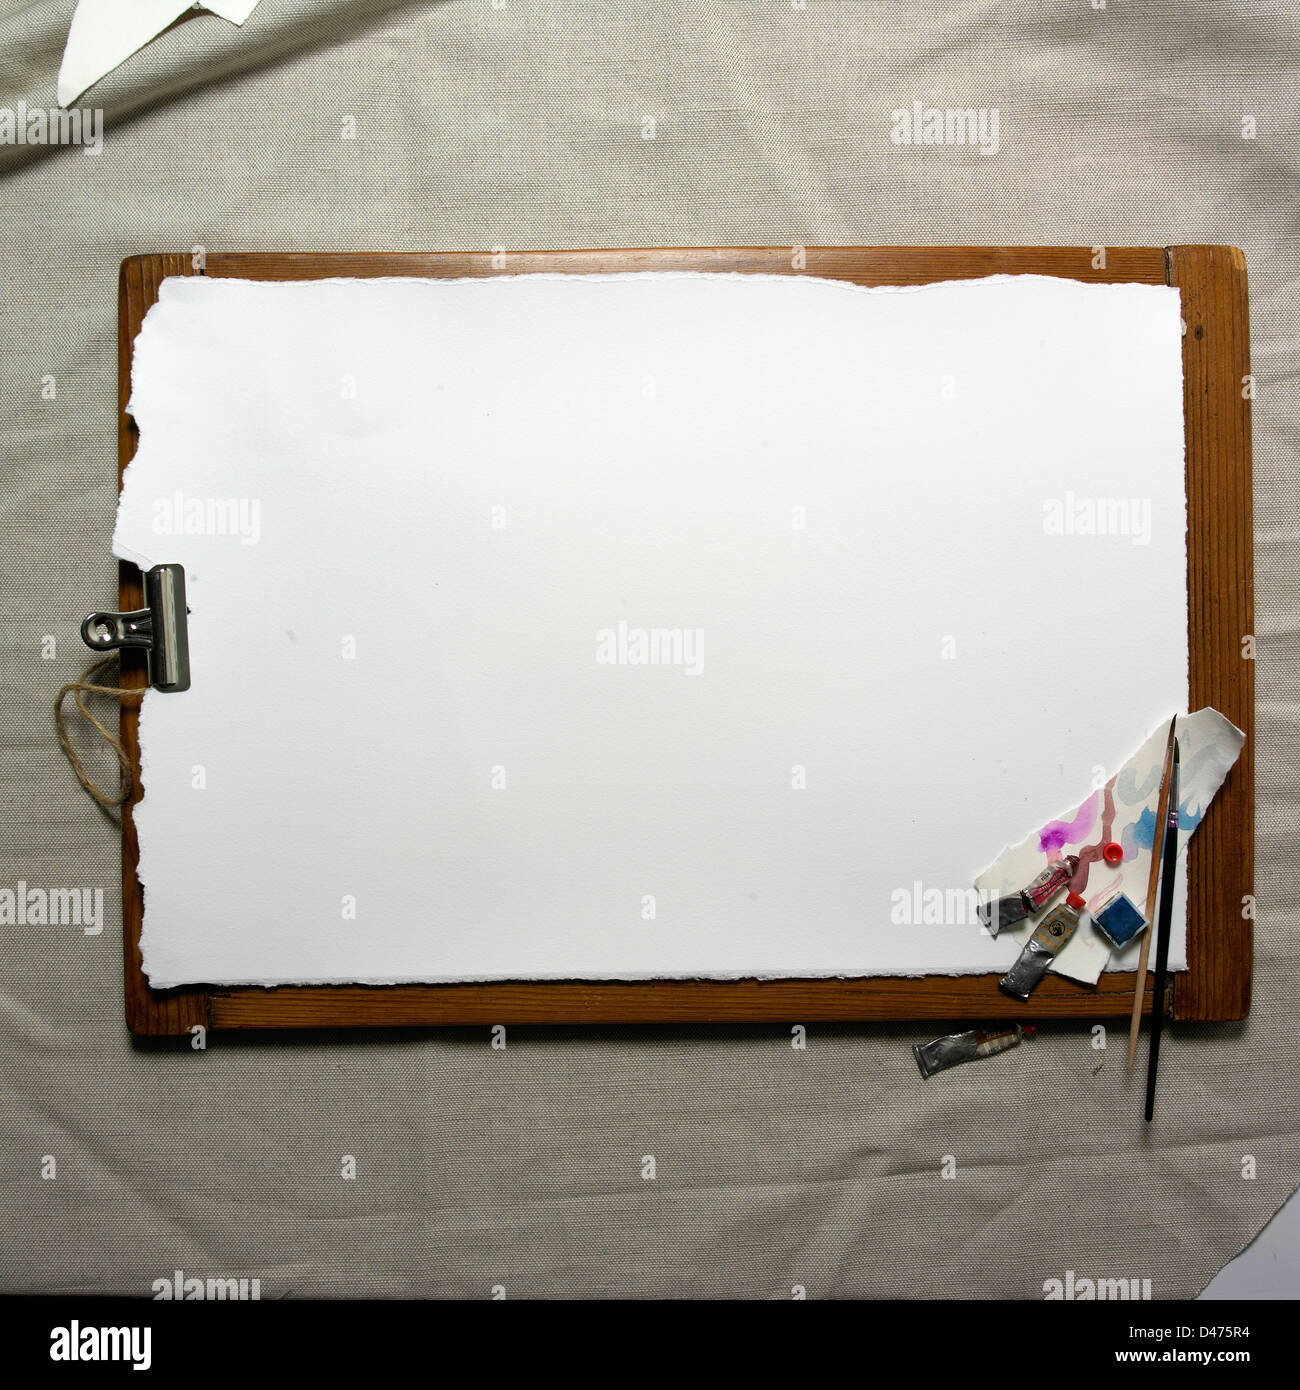 Artists board with watercolour paper and clip on a grey fabric background Stock Photo